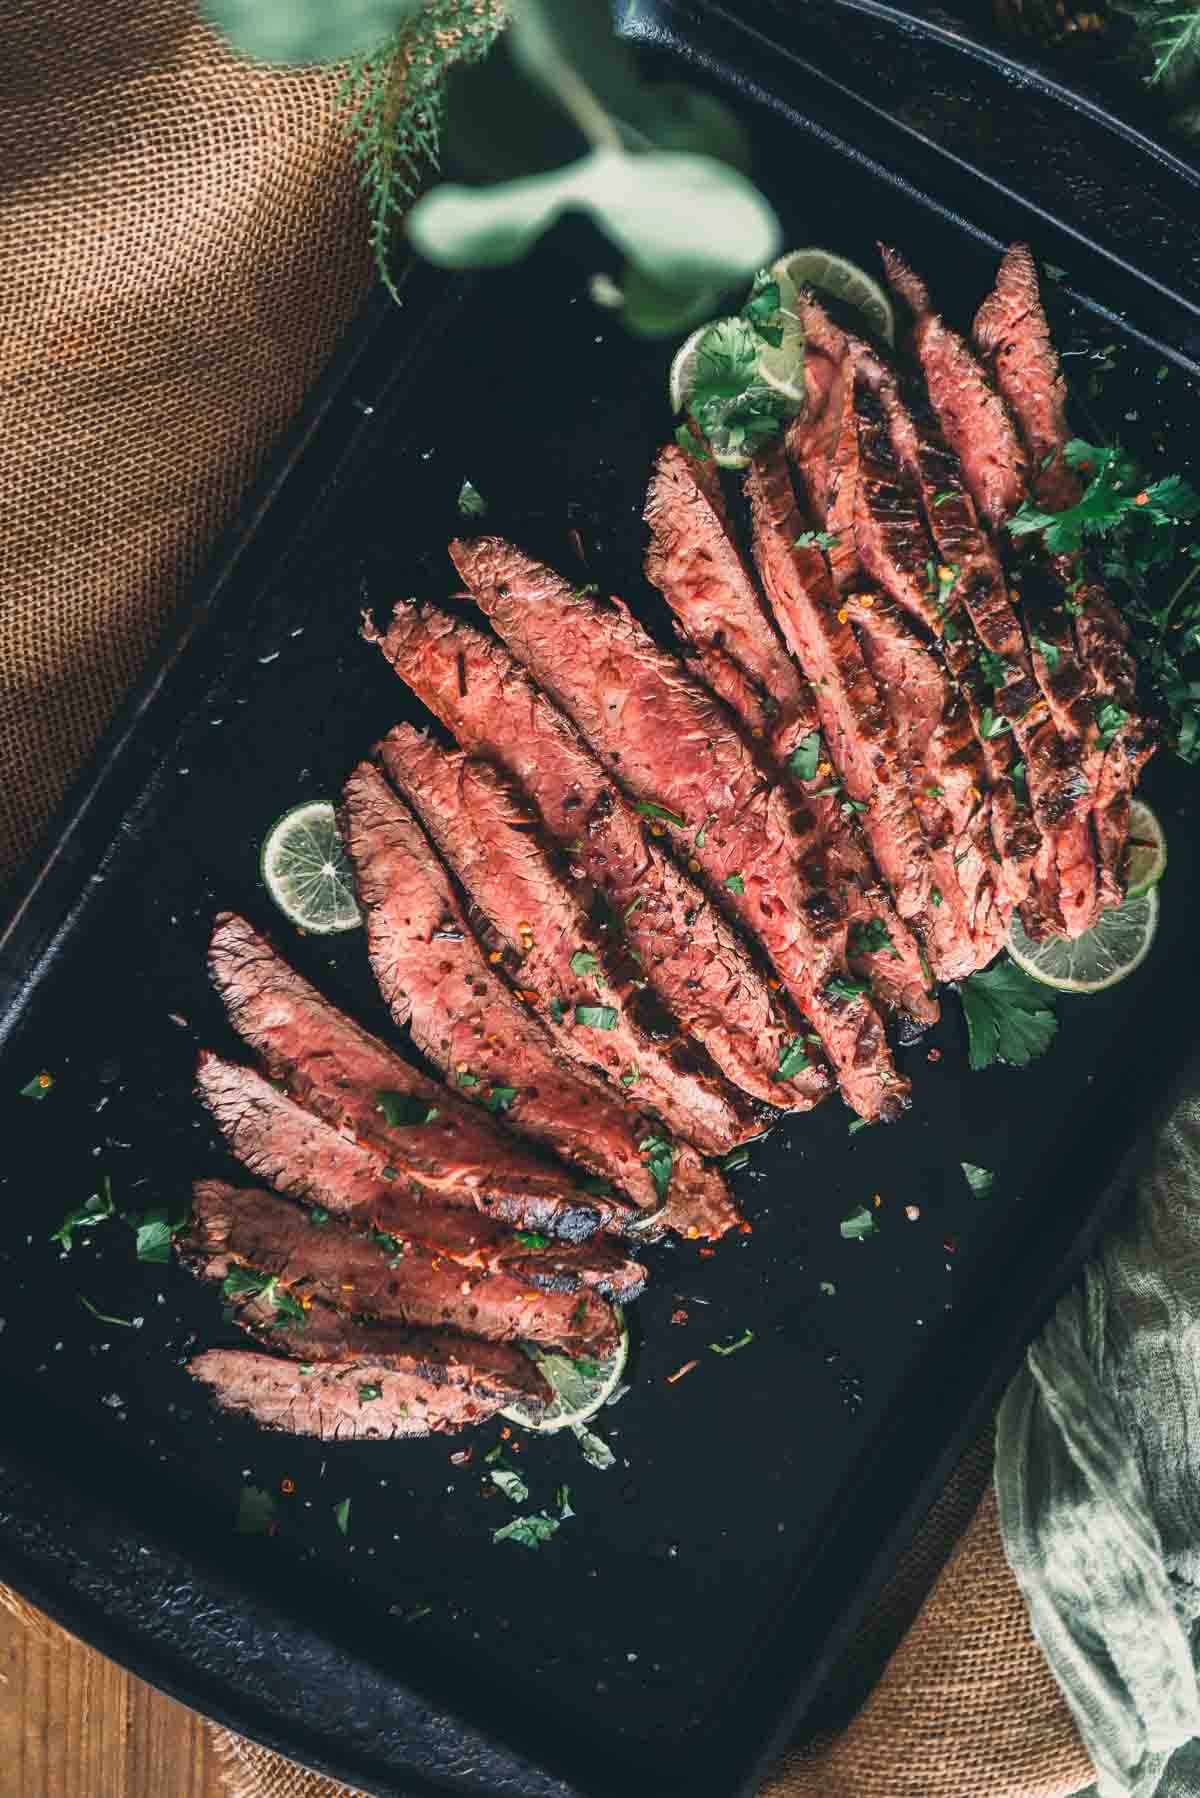 How To Cook Flank Steak in the Oven